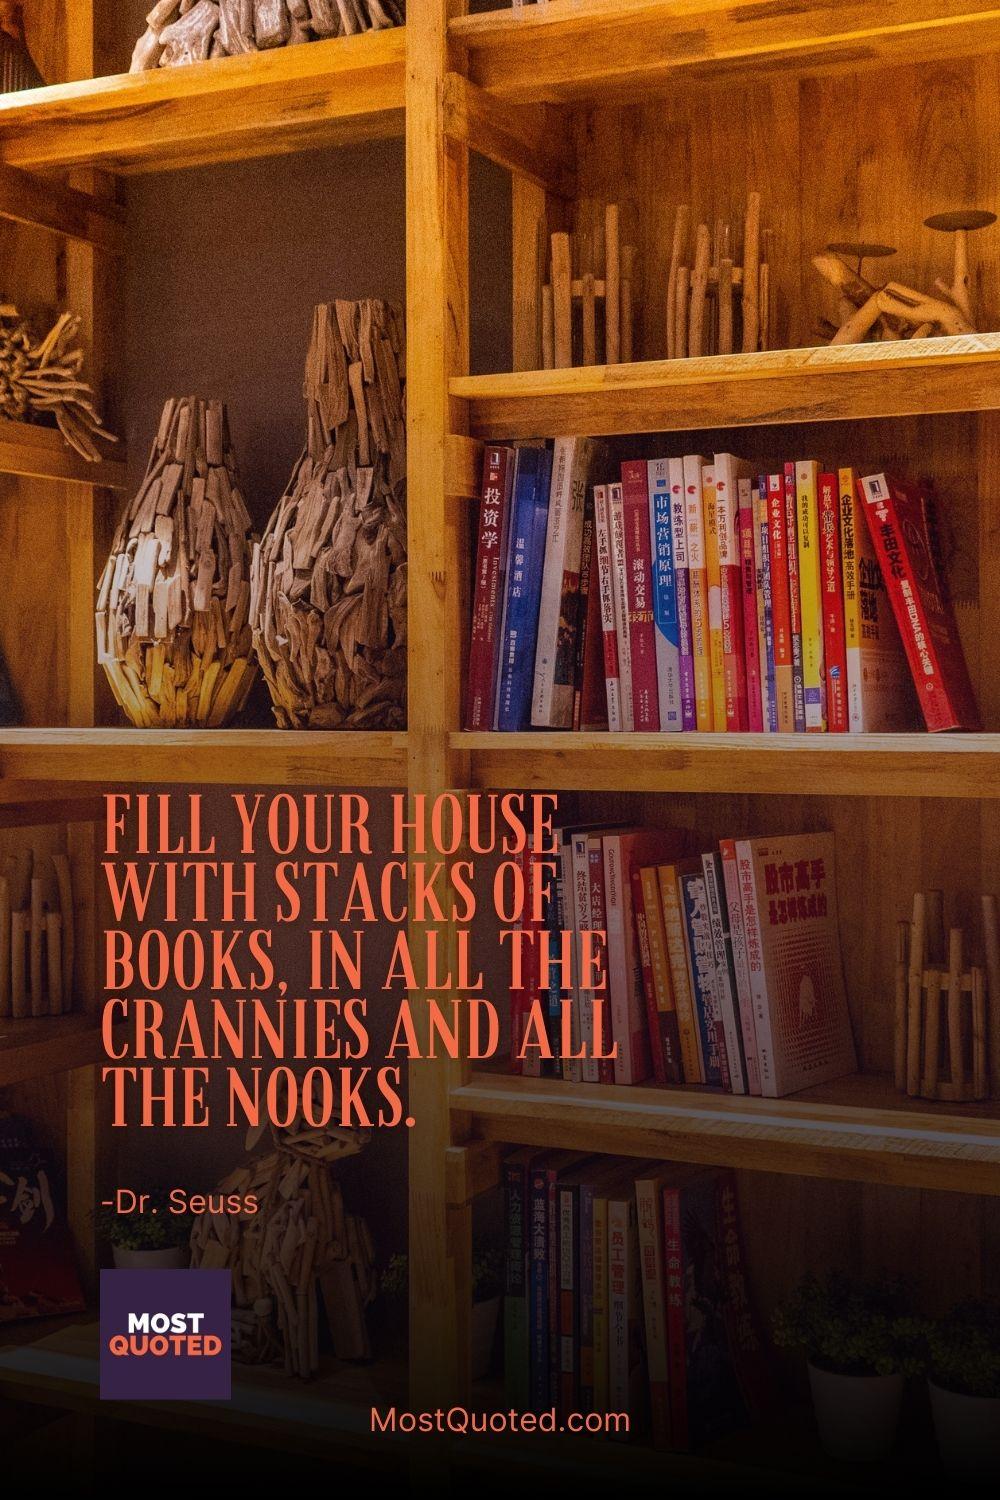 Fill your house with stacks of books, in all the crannies and all the nooks. - Dr. Seuss